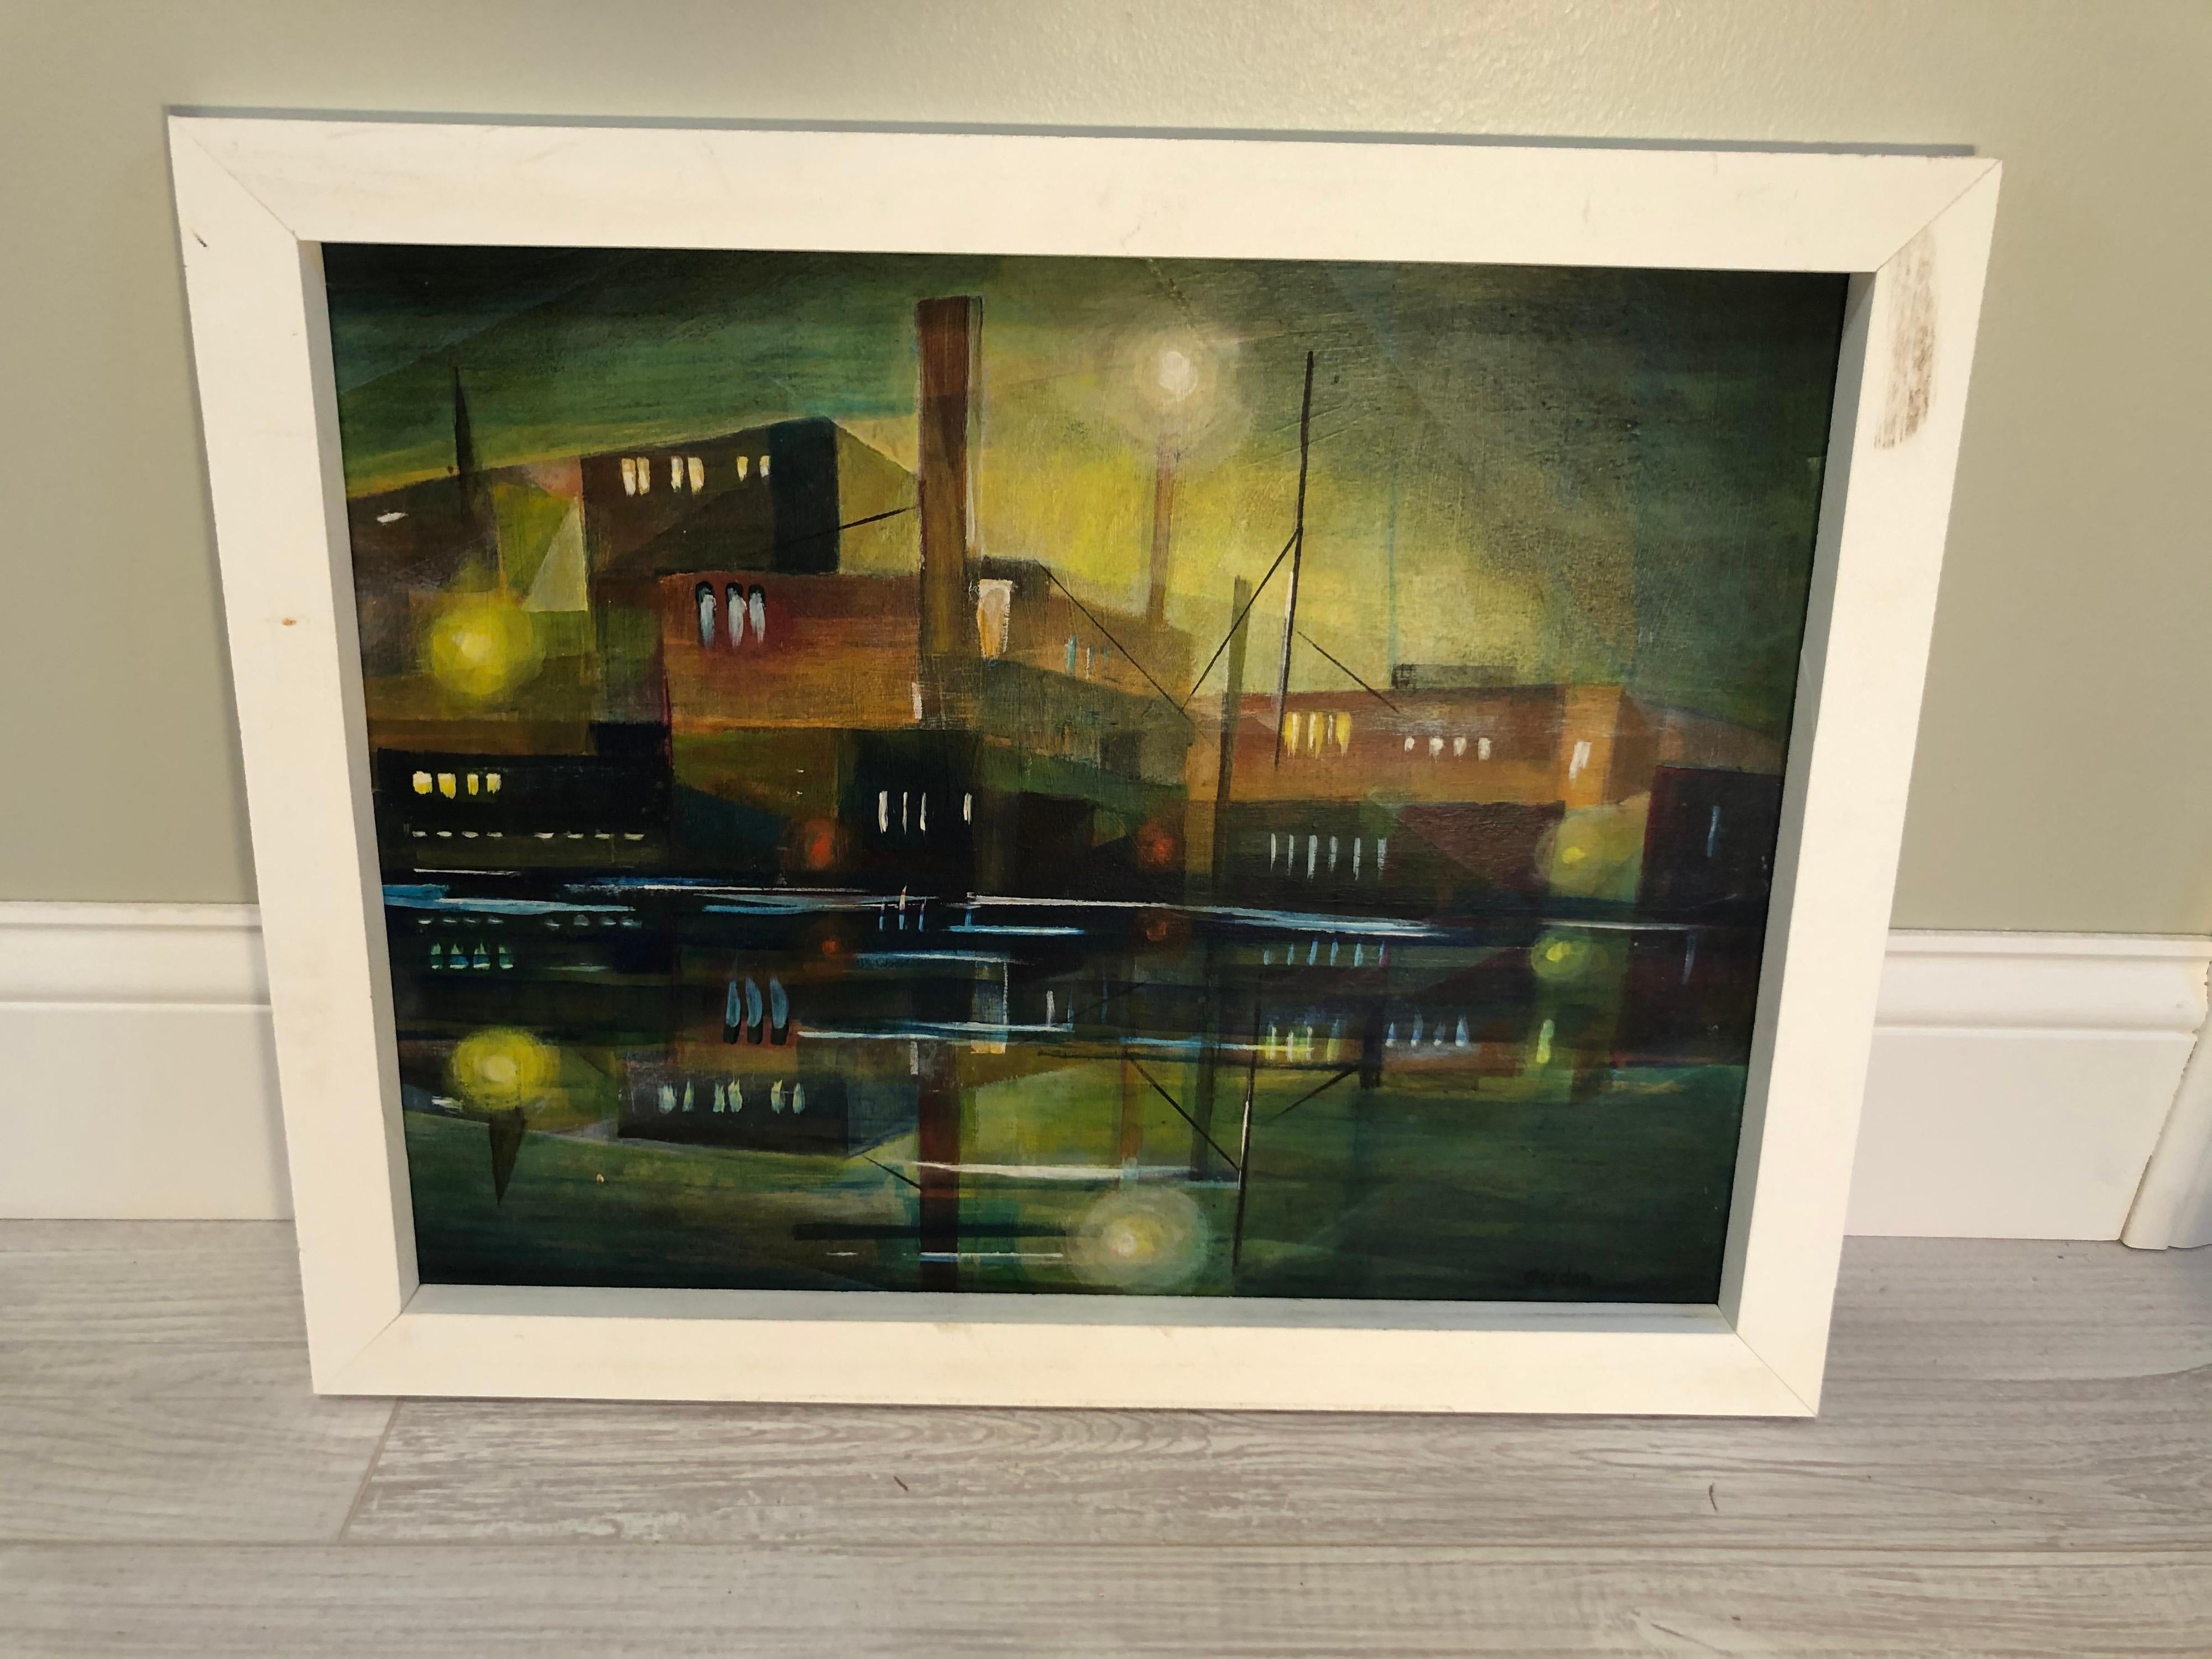 Mid Century Cubist Painting of an Industrial Building. Painting on board and housed in a solid wooden frame. colors include greens, golds, and orange. Nice industrial vibe to this composition.